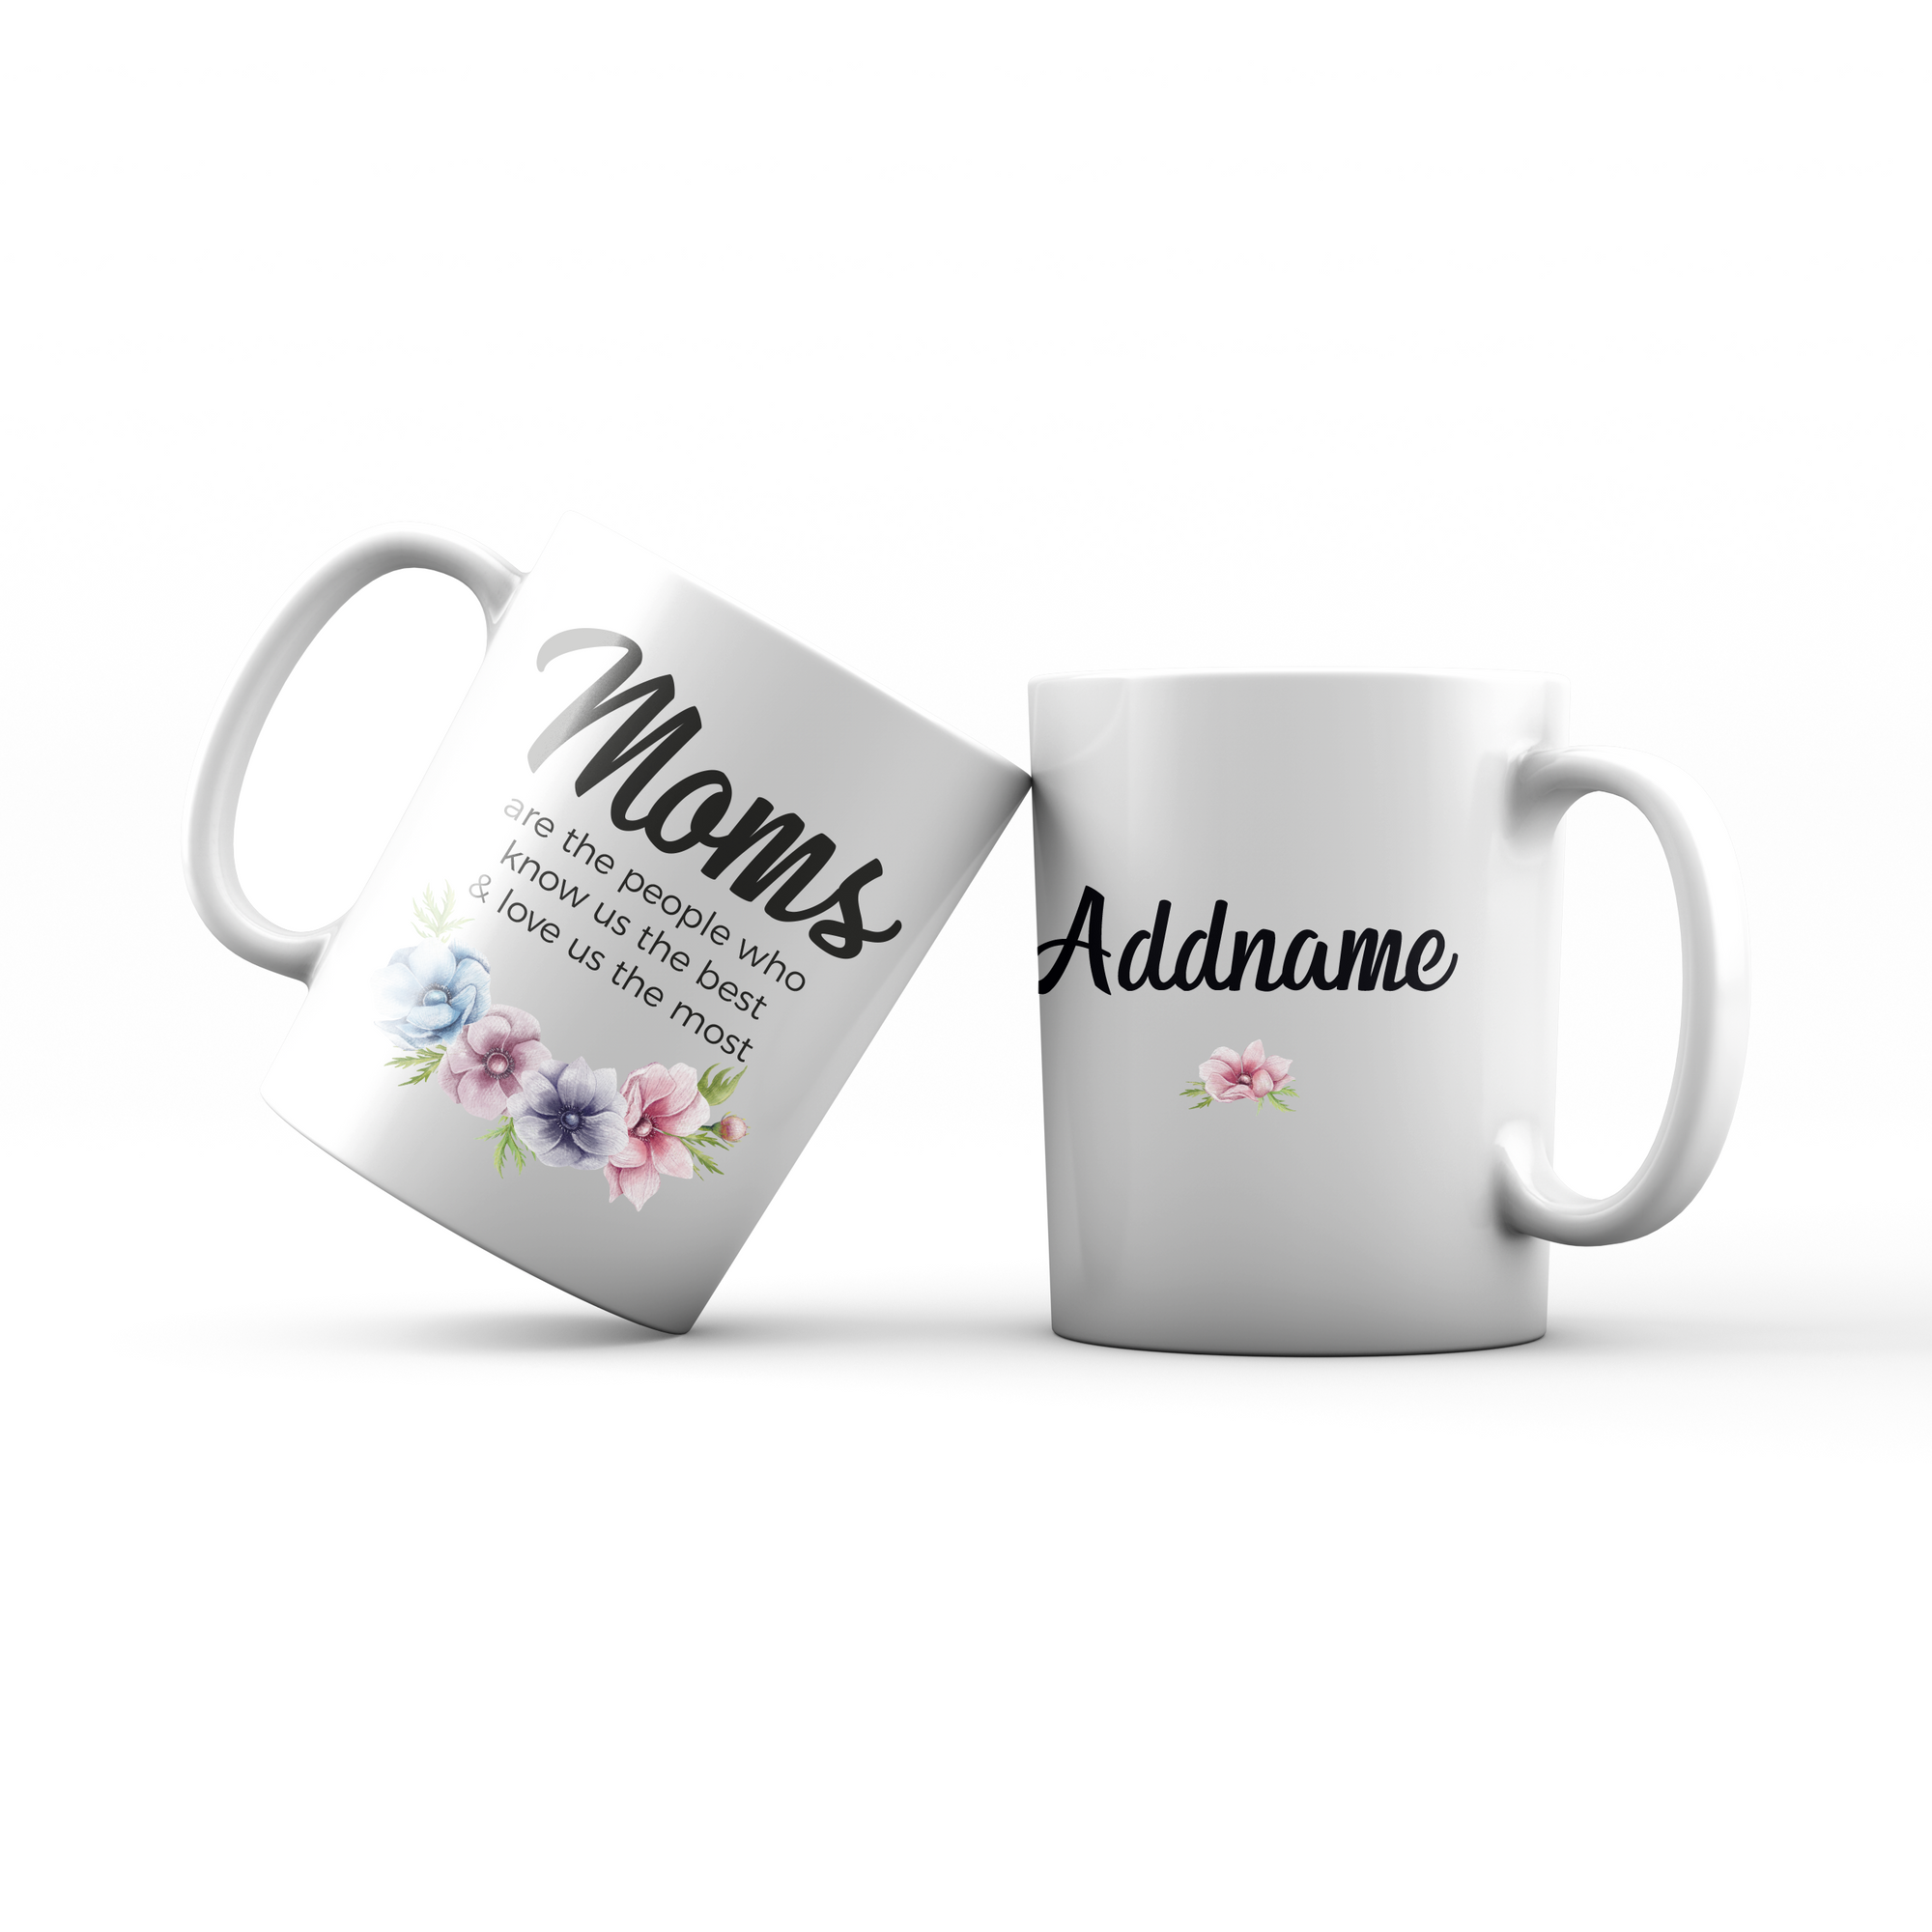 Sweet Mom Quotes 1 Moms Are The People Who Know Us The Best & Love Us The Most Addname Mug